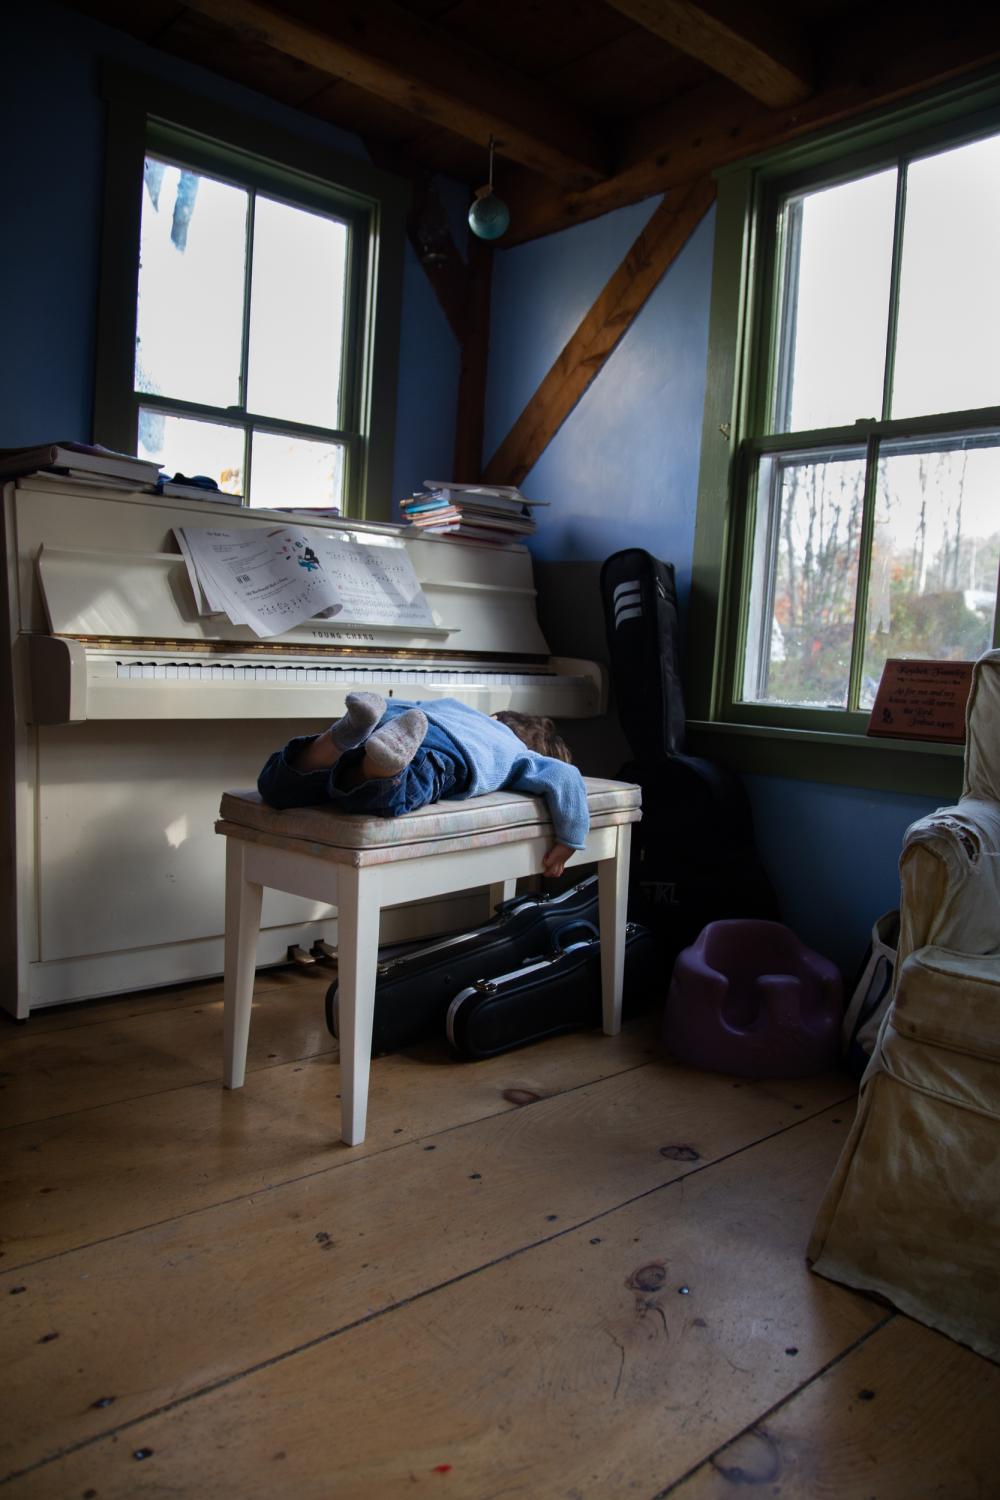 Isaak lays on the piano chair on a winter morning Bremen, Maine, 2014.